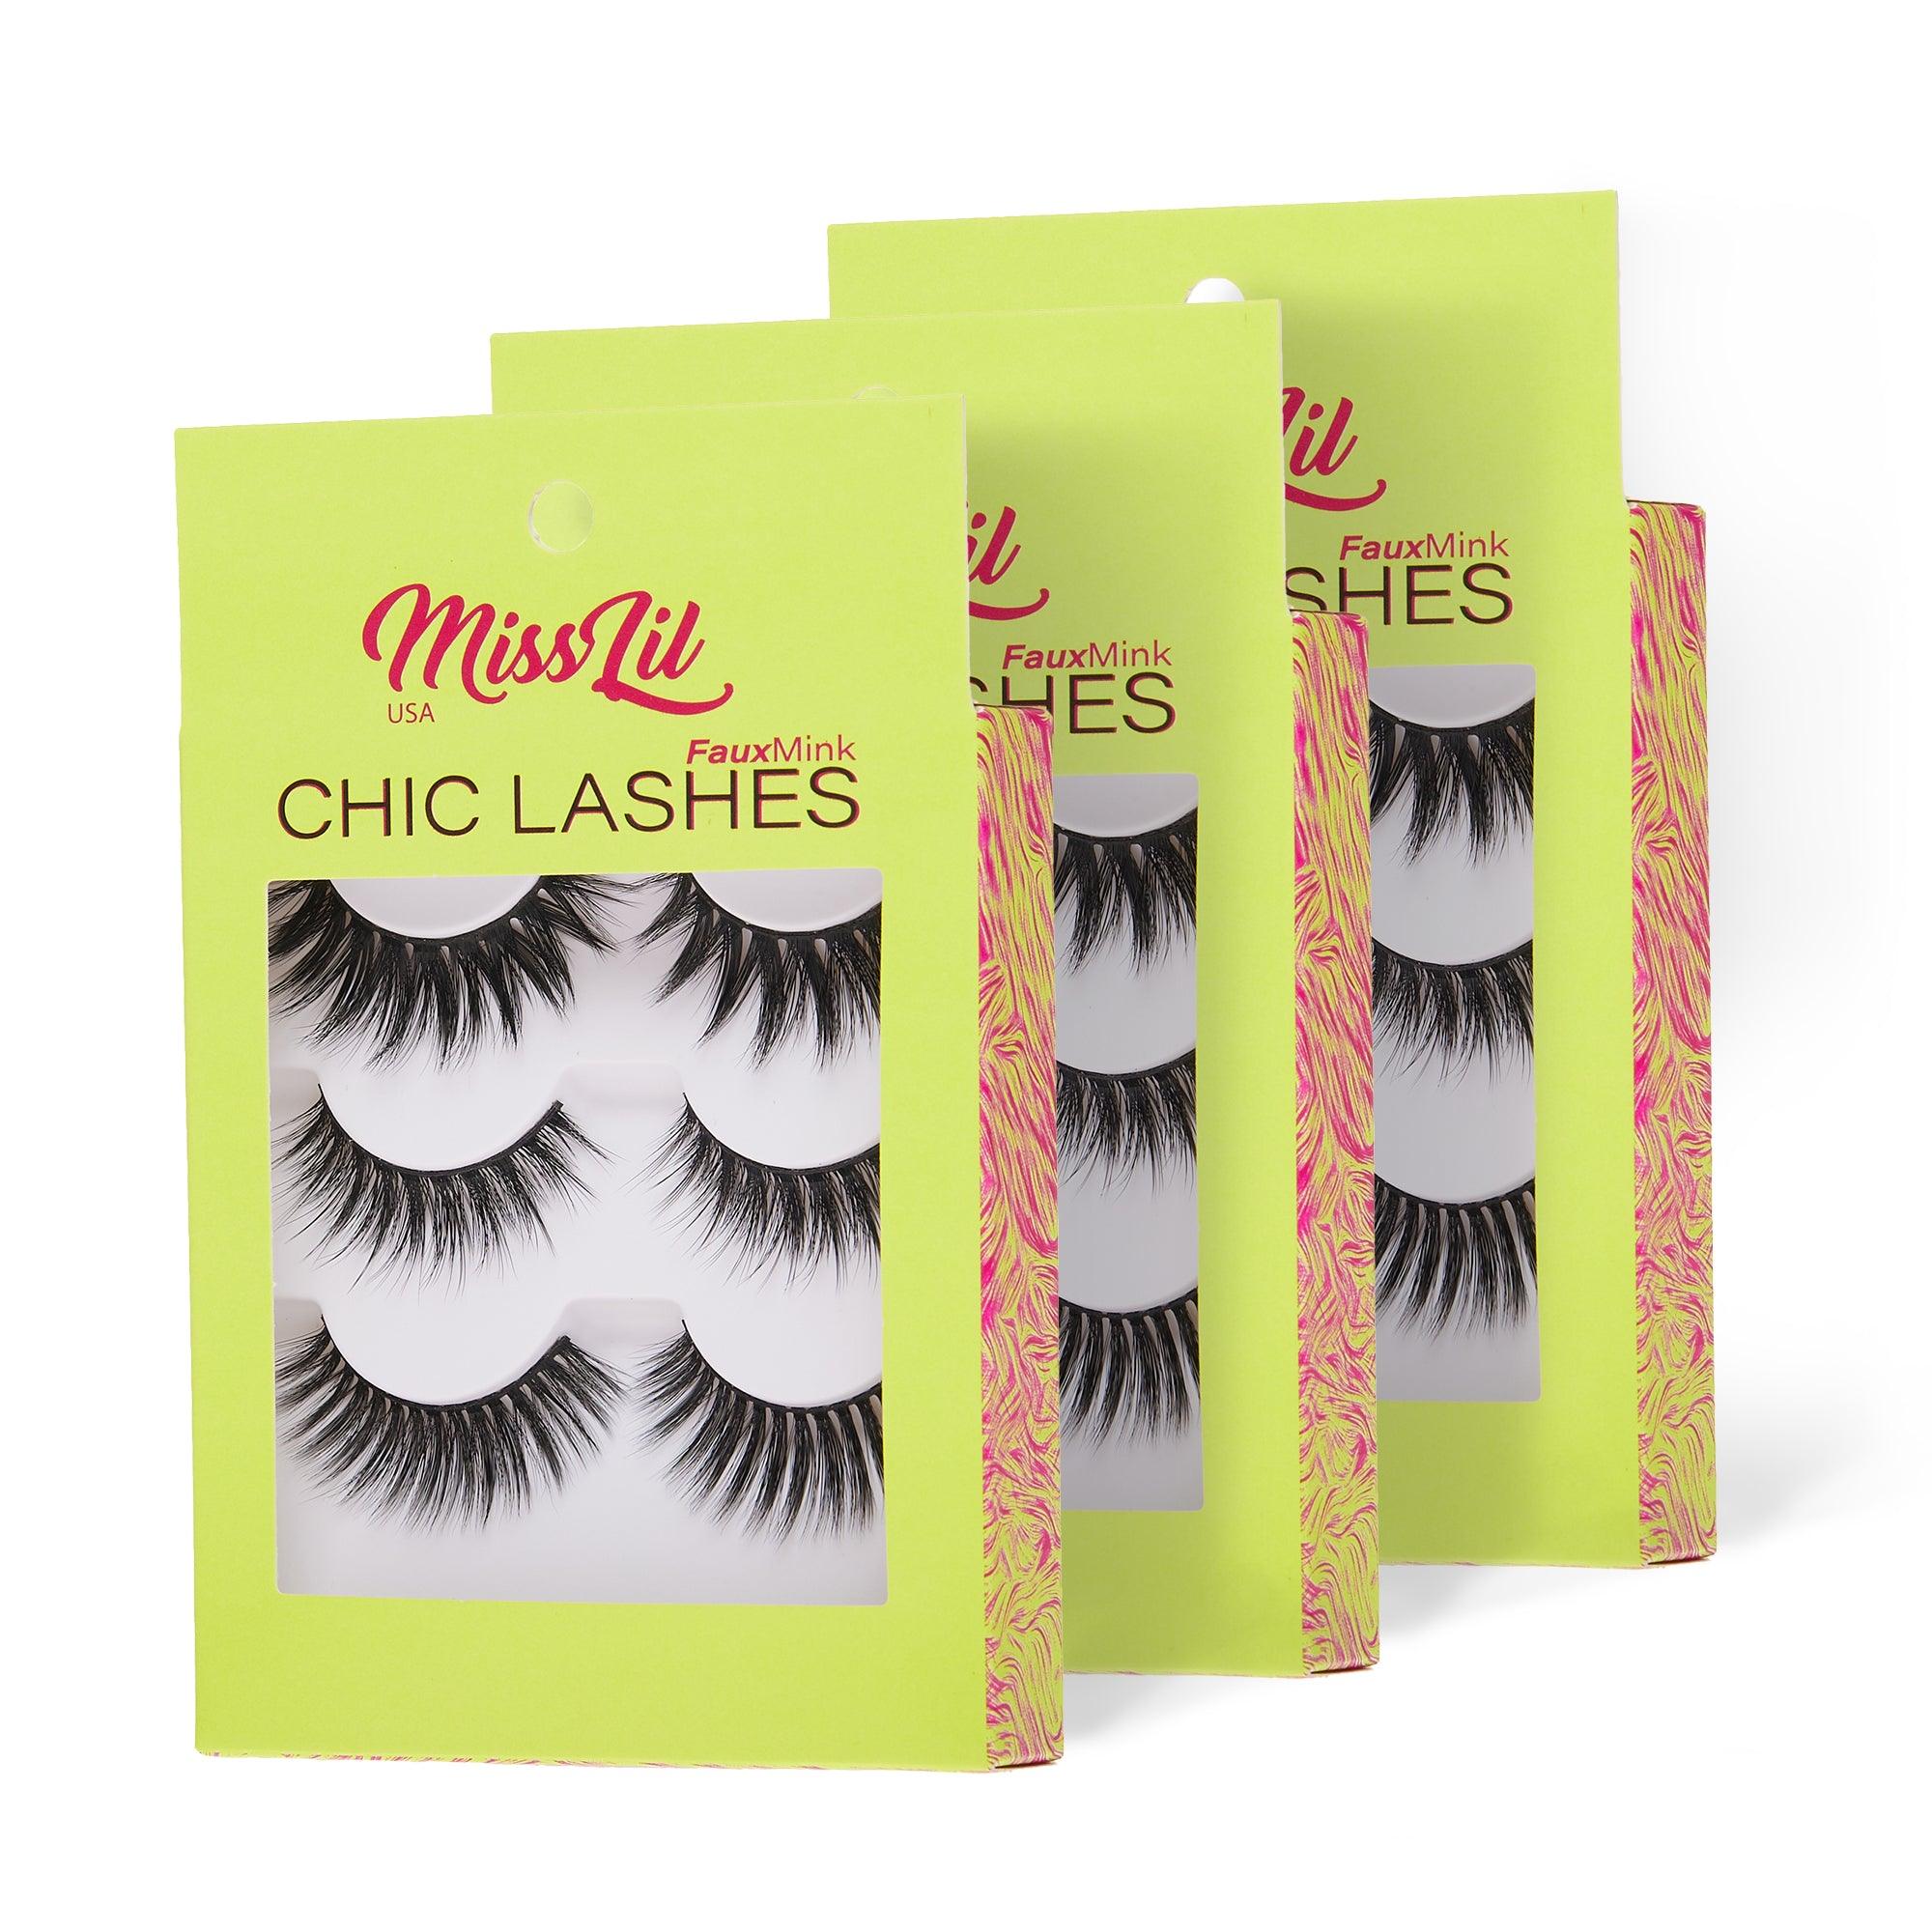 3-Pairs Lashes-Chic Lashes Collection #35 (Pack of 12) - Miss Lil USA Wholesale